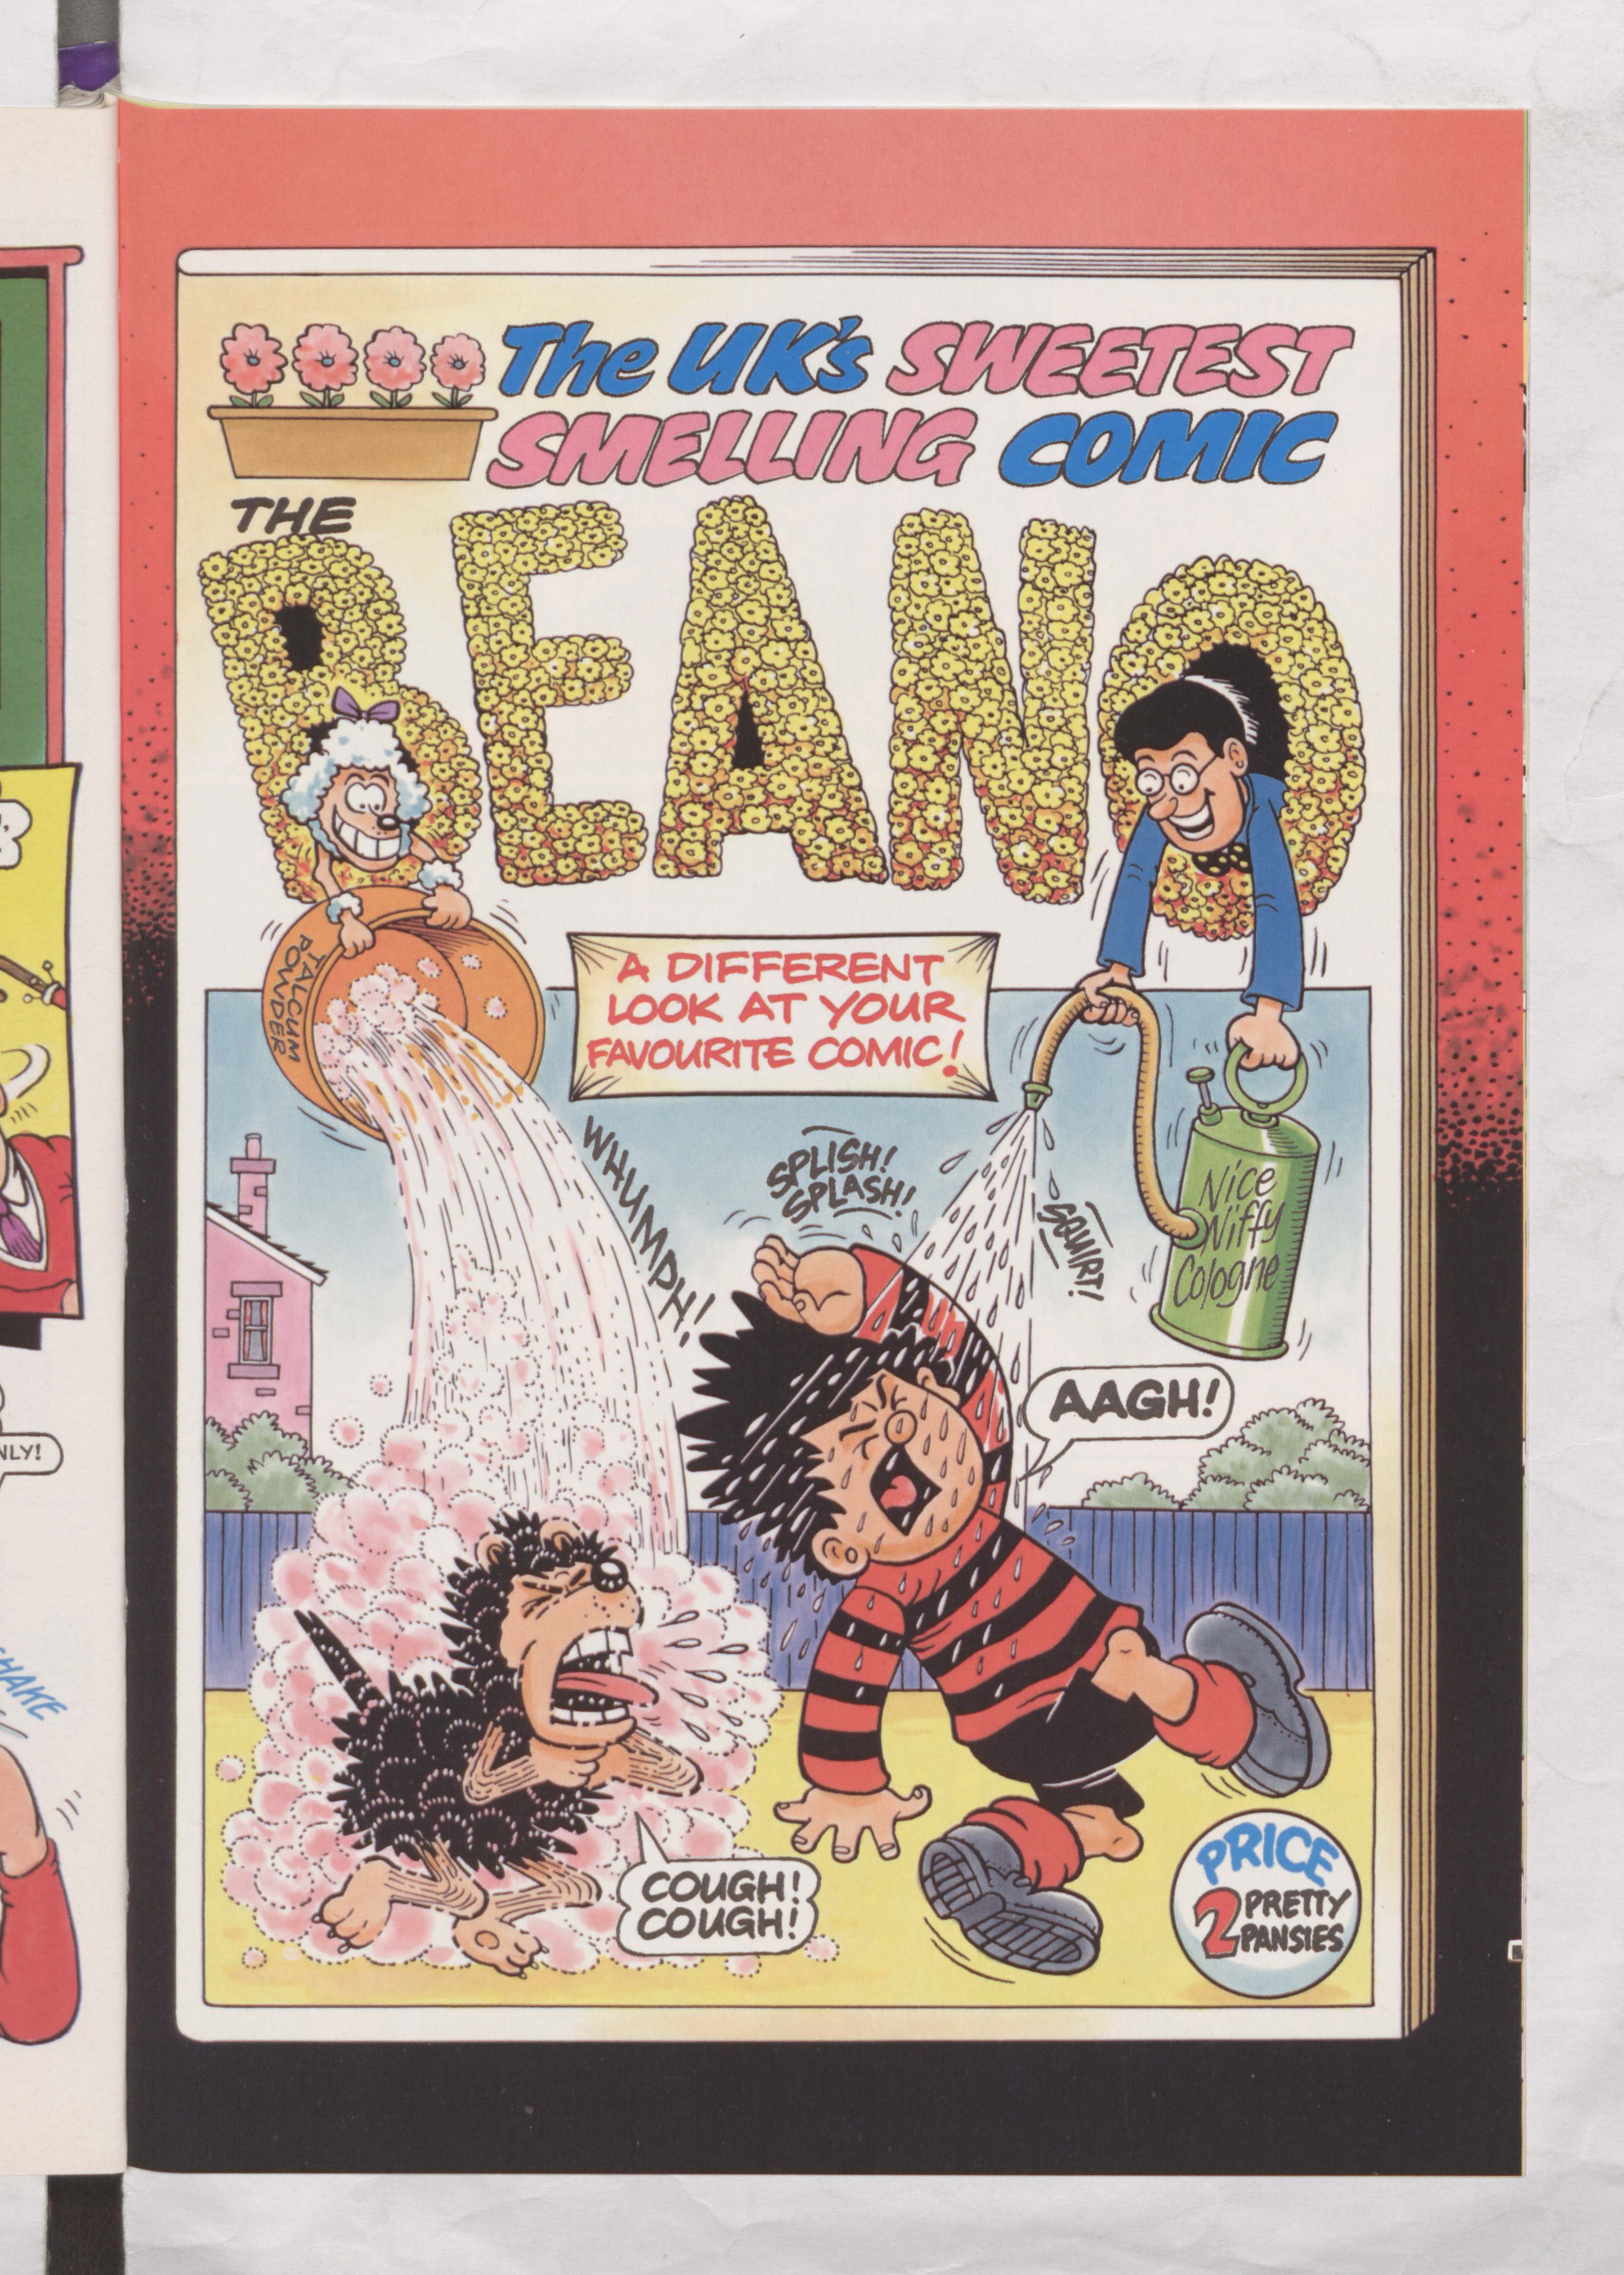 The UK's Sweetest Smelling Comic - Beano Book 2002